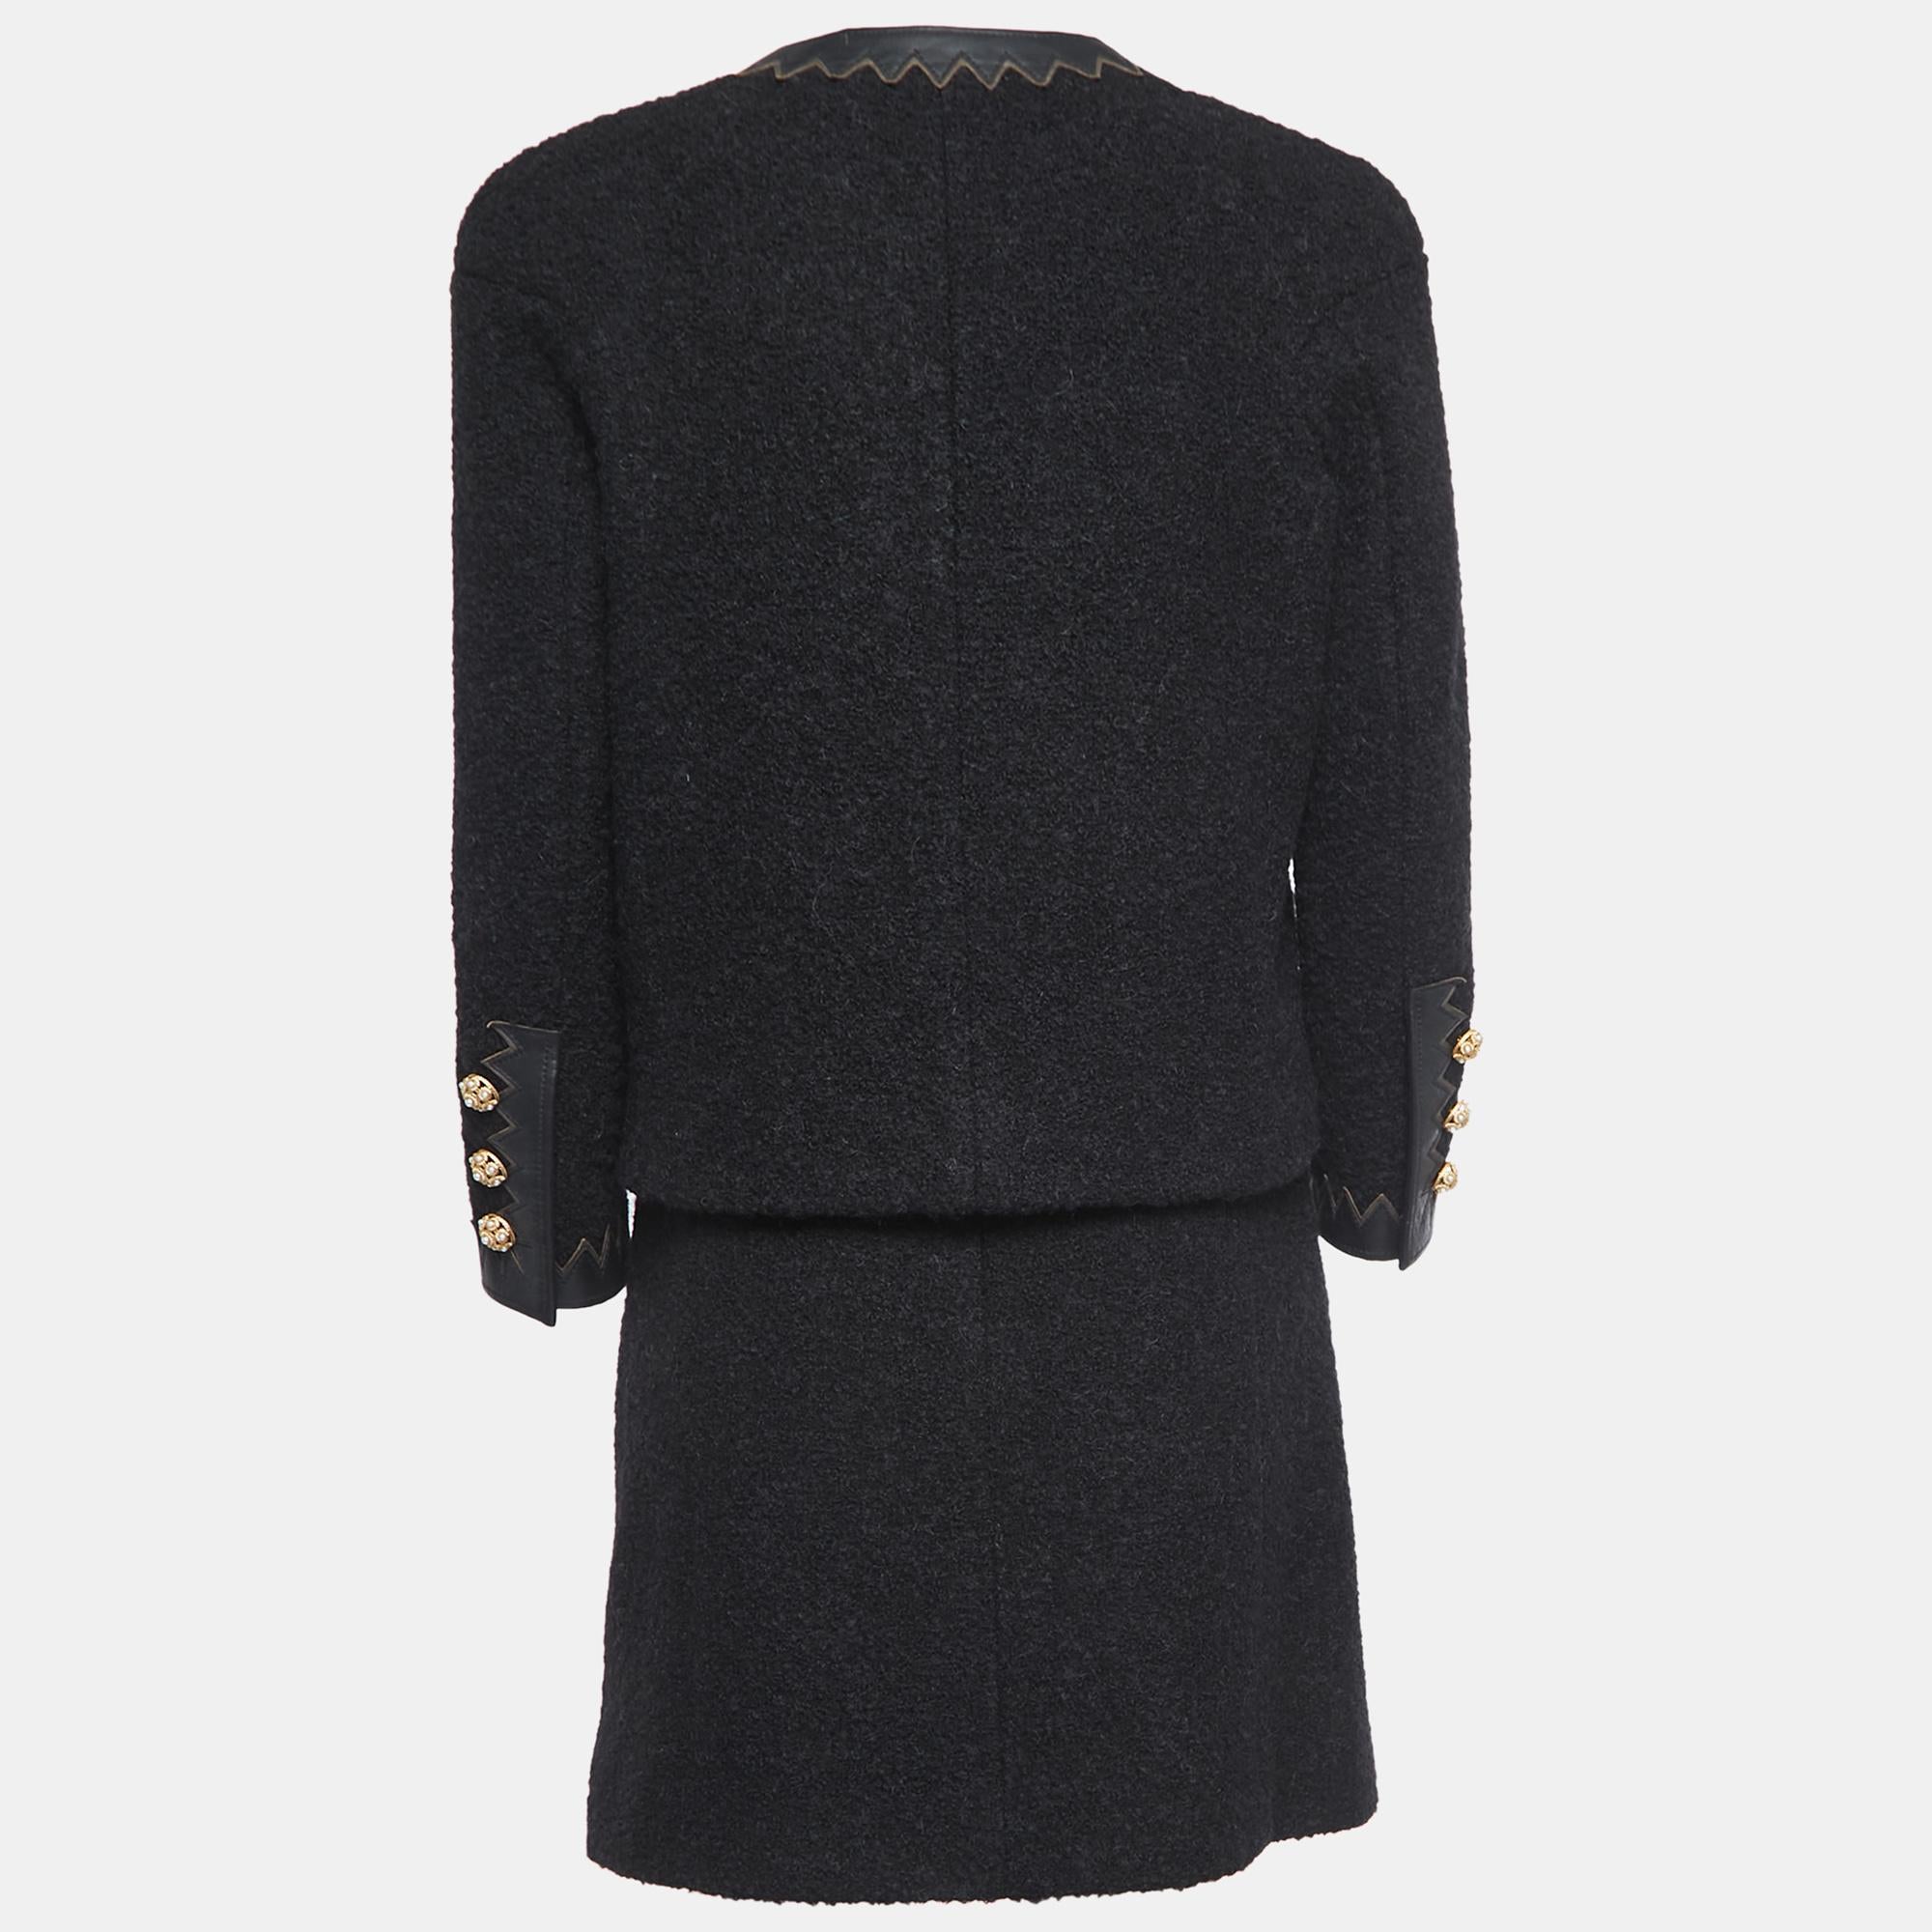 Characterized by impeccable tailoring, a good fit, and the use of fine fabric, this Chanel skirt suit will help you serve stylish looks. Style it with heels or flats to bring out the appeal of the creation.

